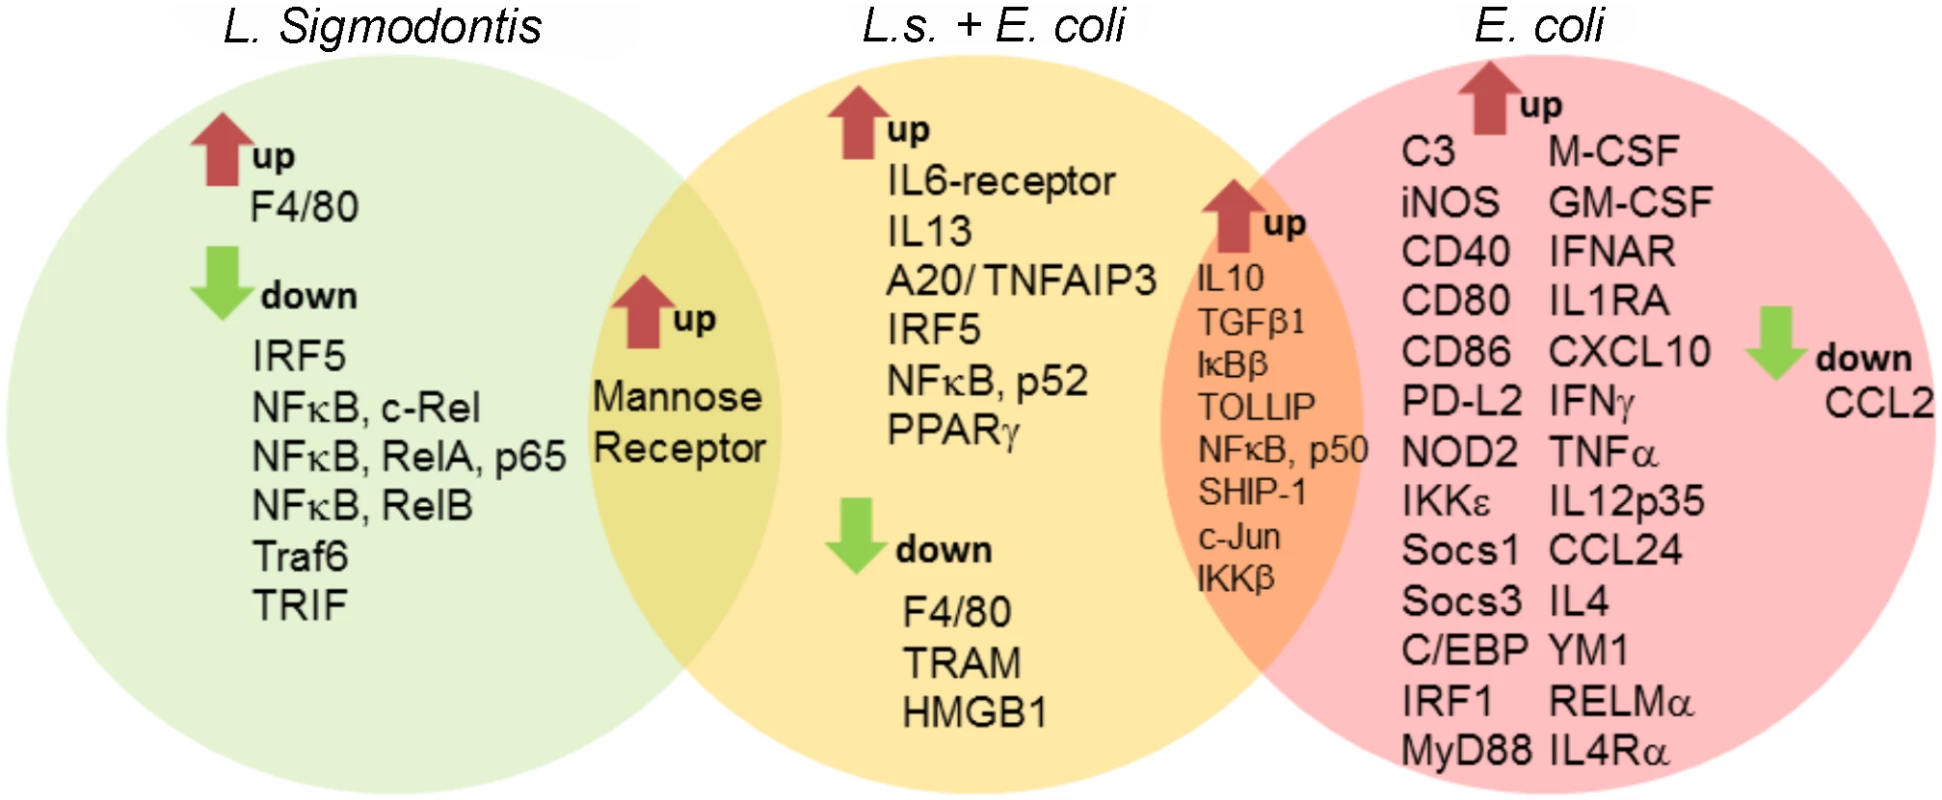 Macrophage transcriptional analysis reveals a less inflammatory phenotype in <i>L. sigmodontis</i>-infected mice during <i>E. coli</i> challenge.